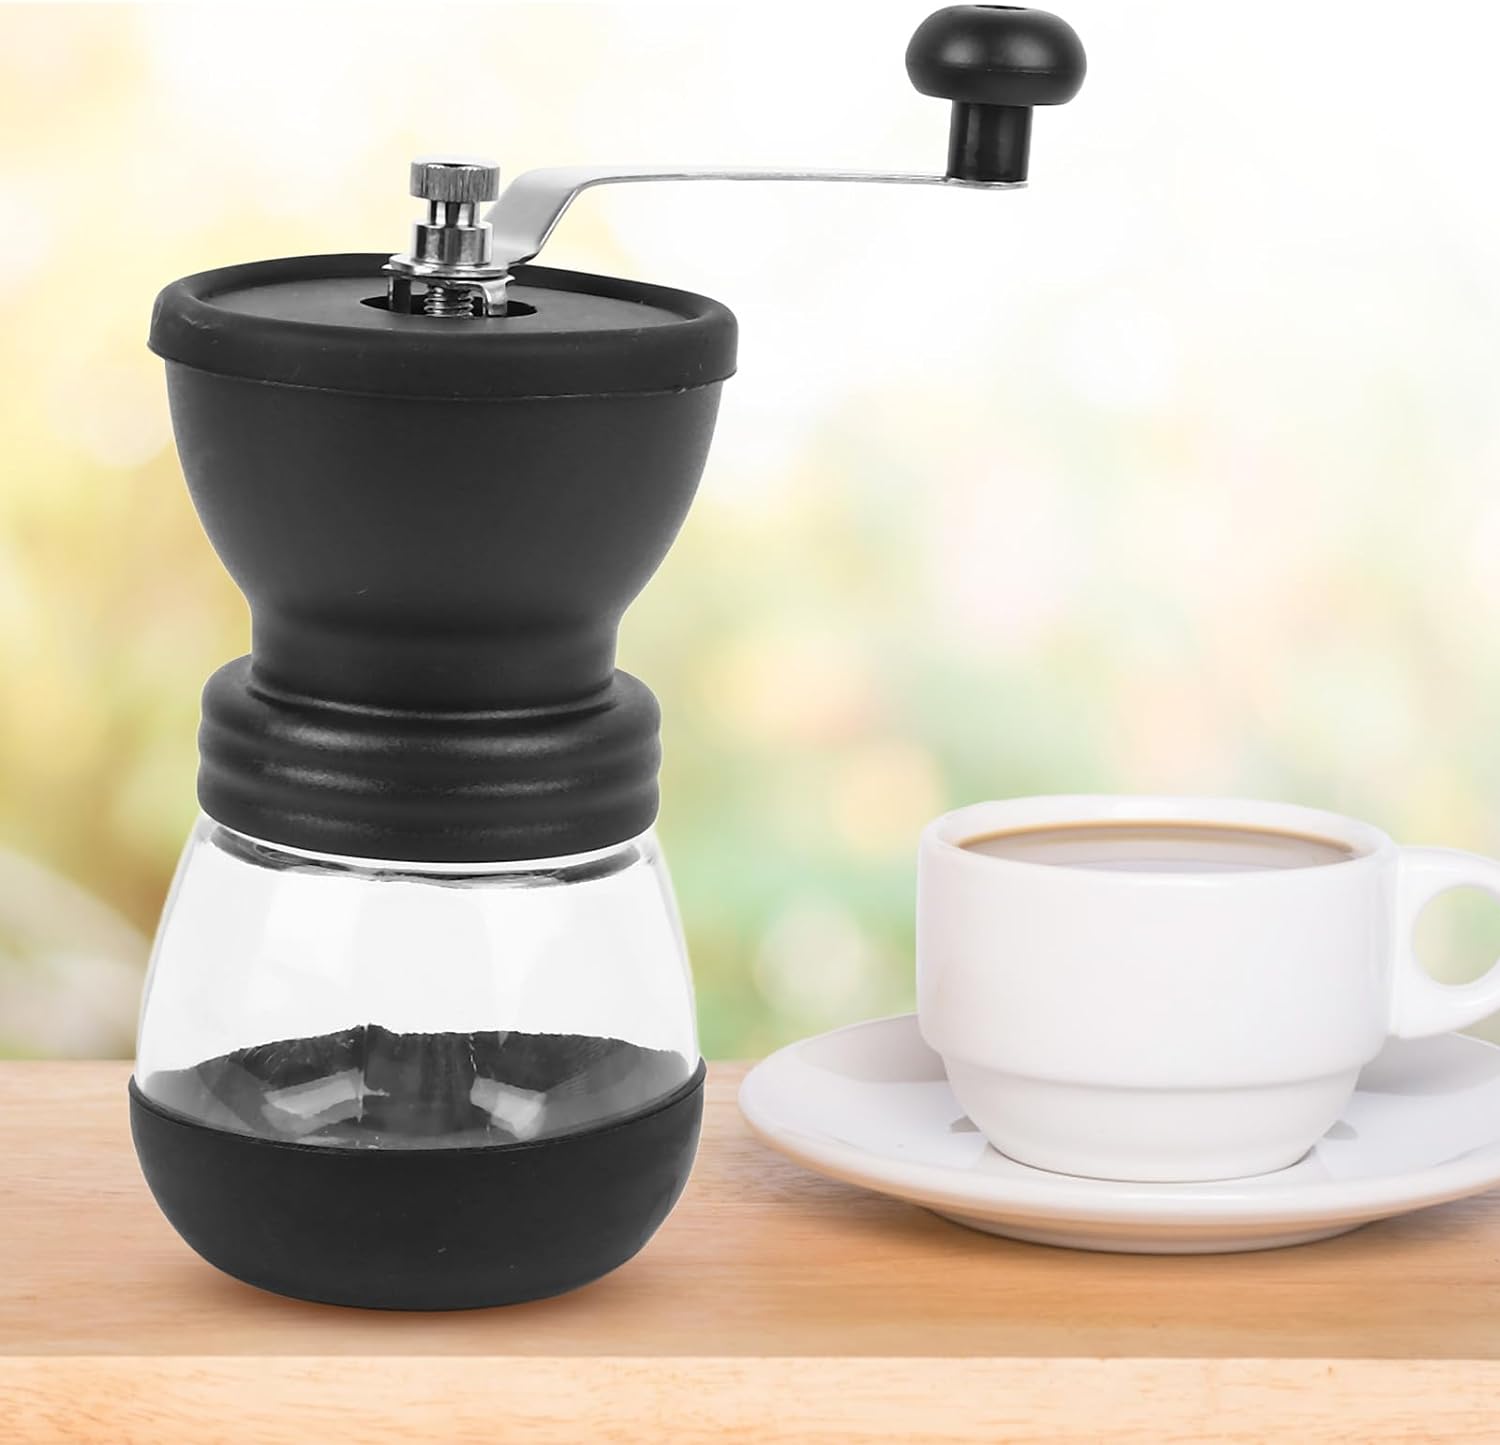 Manual Coffee Grinder with Ceramic Burrs,Grind Size, Hand Grinding, Compact and Portable, Easy to Clean